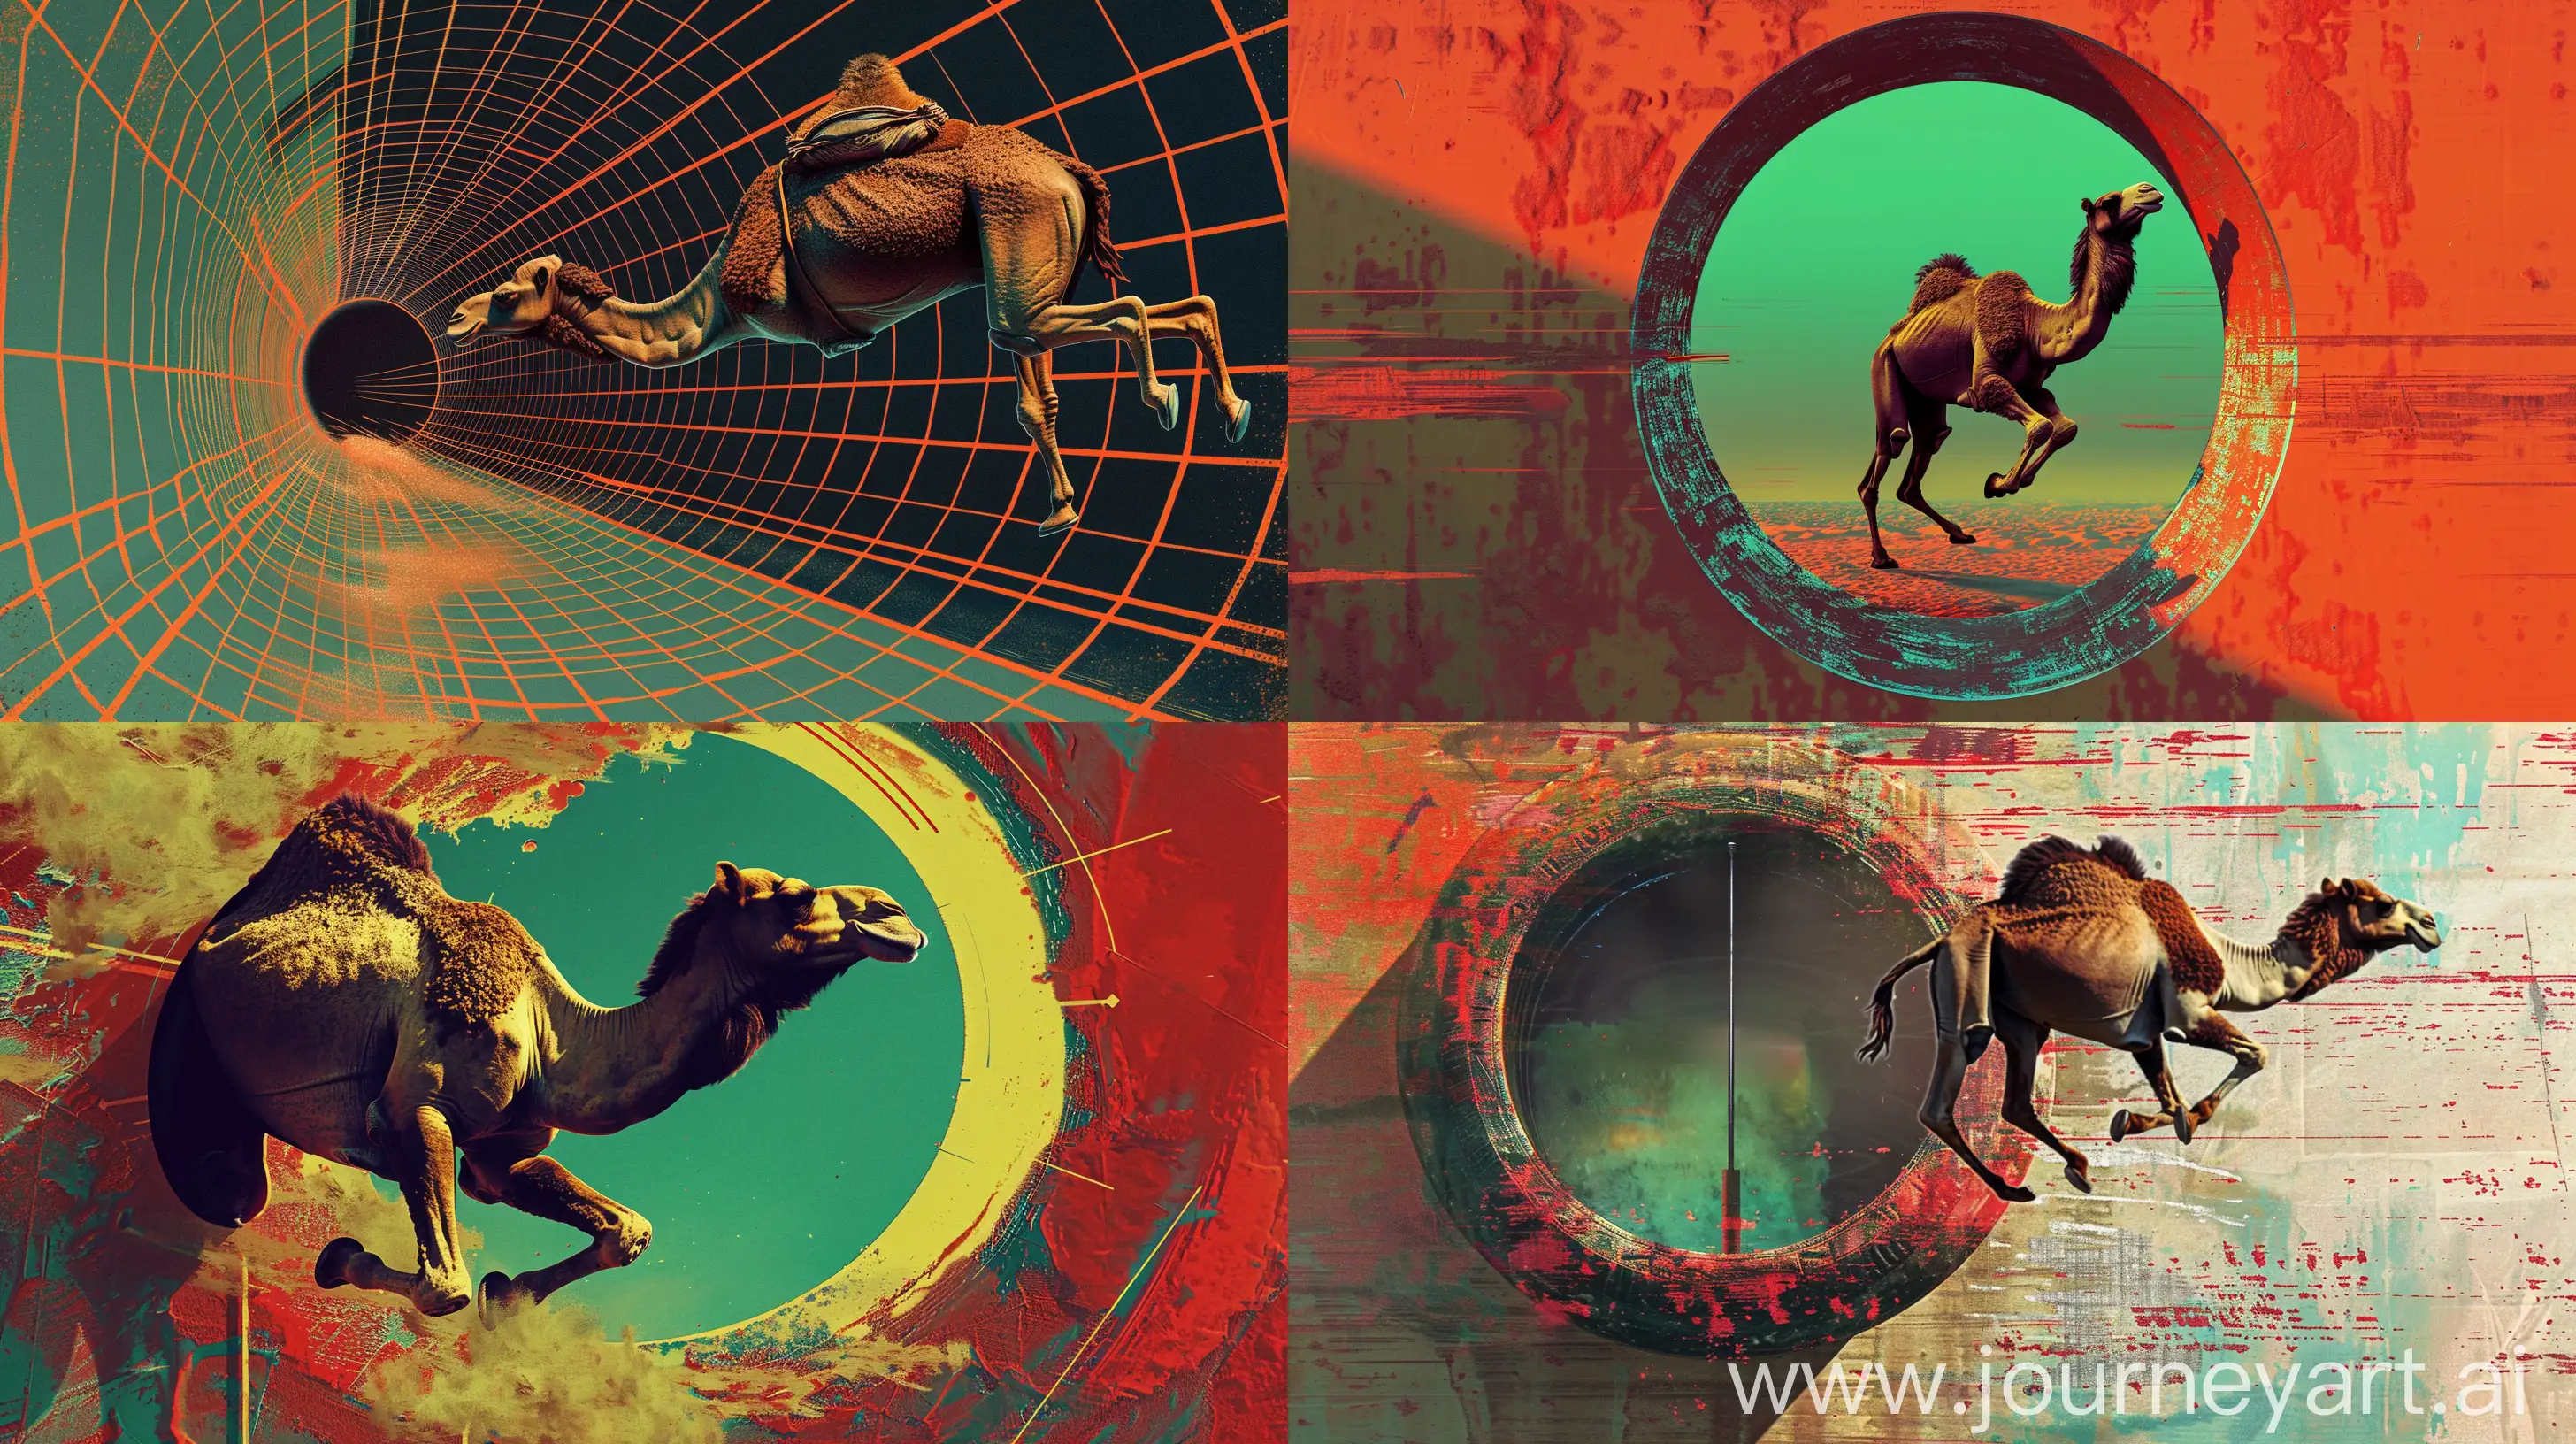 retrofuturistic film noi.a compeling and dramatized image where a fleeing camel suddeny finds itsef facing the eye of a needle. The scene should convey tension anddificuty,with the camel franticaly atempting to jump through the narow opening to escape a pursuer,like a ion.Use intense colors to emphasize the action and capture theemotion of the situation. Tryto make the absurdity of the endeavor evident, highighting the contrasting size of the camel and the eve of the nedl.The focus shoud be on thechallenge and drama of the moment. TEXT "JOTIS 2024" --v 6 --s 100 --ar 16:9 --c 0 --q 1